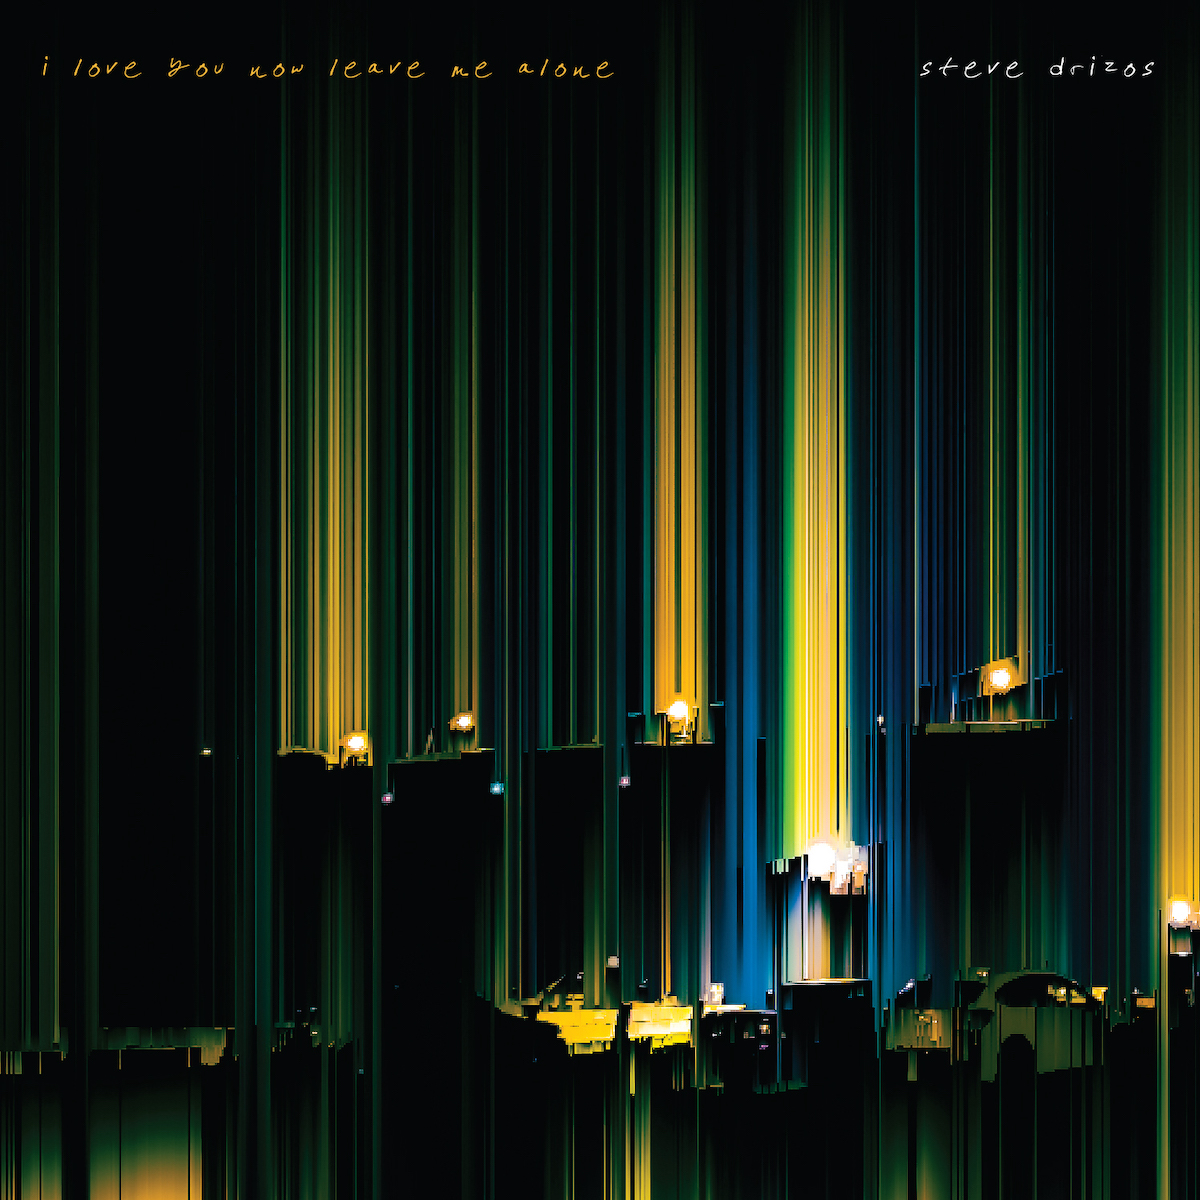 ALBUM REVIEW: i love you now leave me alone by Steve Drizo